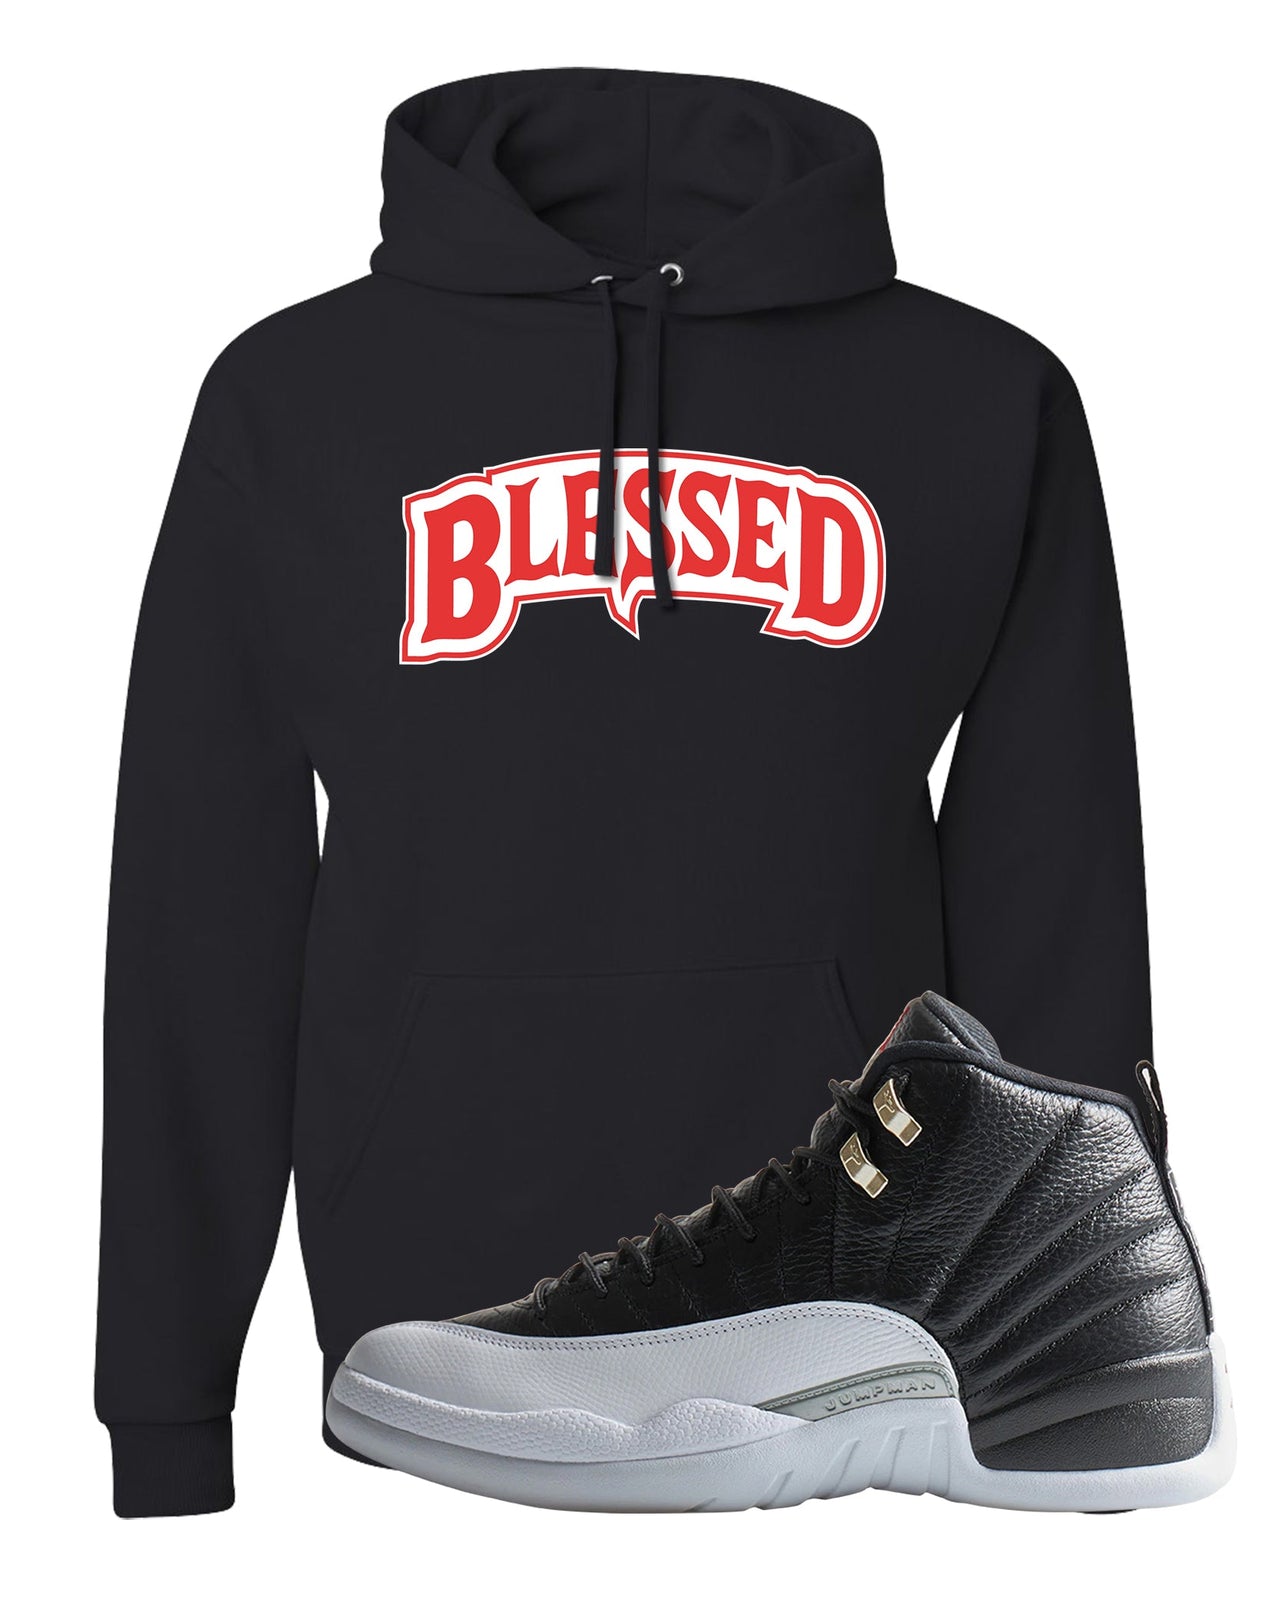 Playoff 12s Hoodie | Blessed Arch, Black